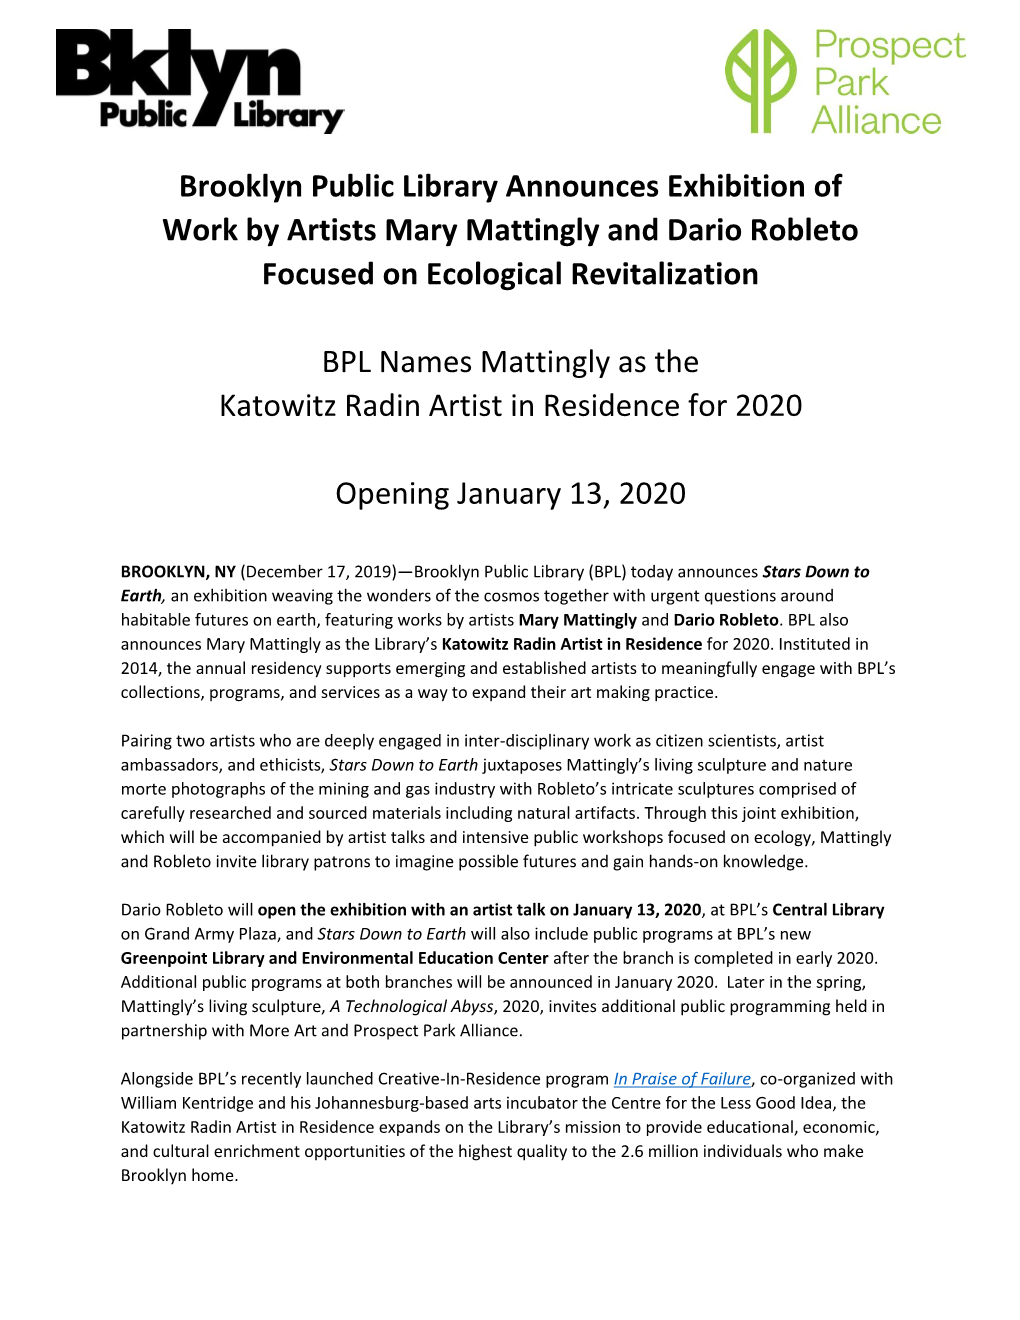 Brooklyn Public Library Announces Exhibition of Work by Artists Mary Mattingly and Dario Robleto Focused on Ecological Revitalization